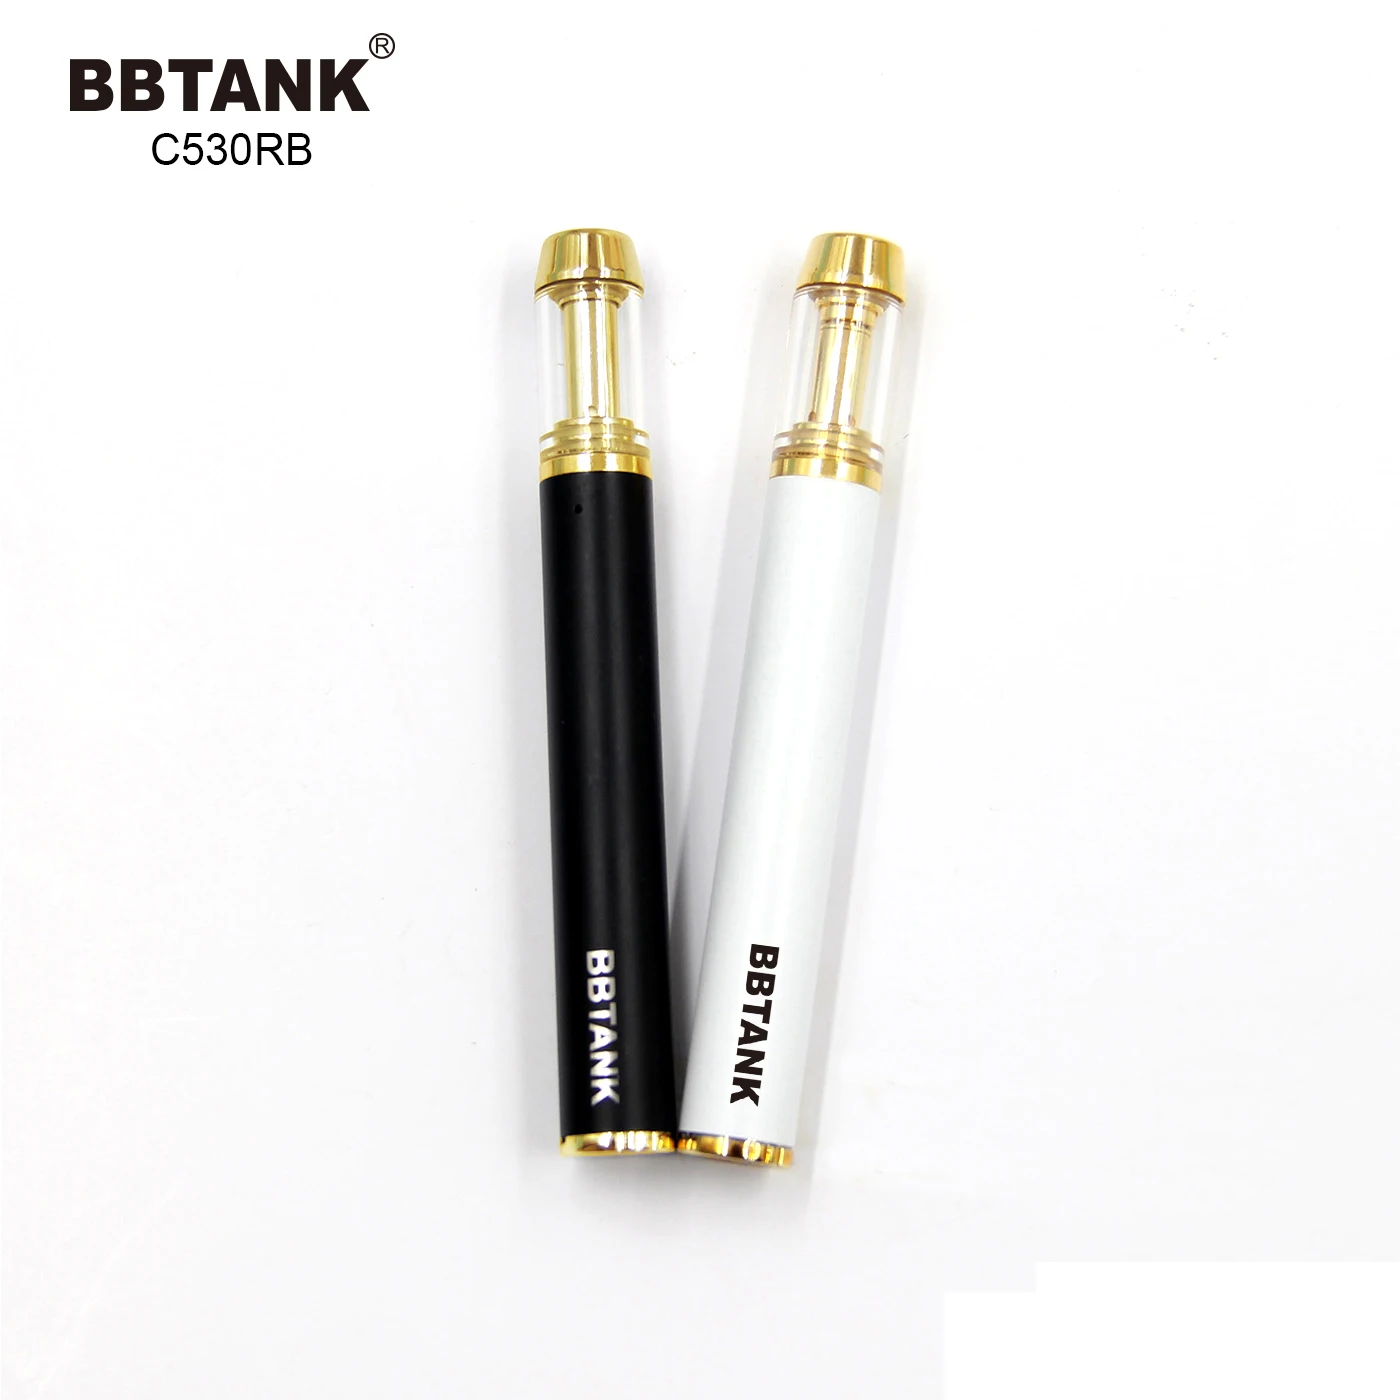 2019 Canada top selling glass atomizer 530mAh battery vape pens with cbd oil packaging